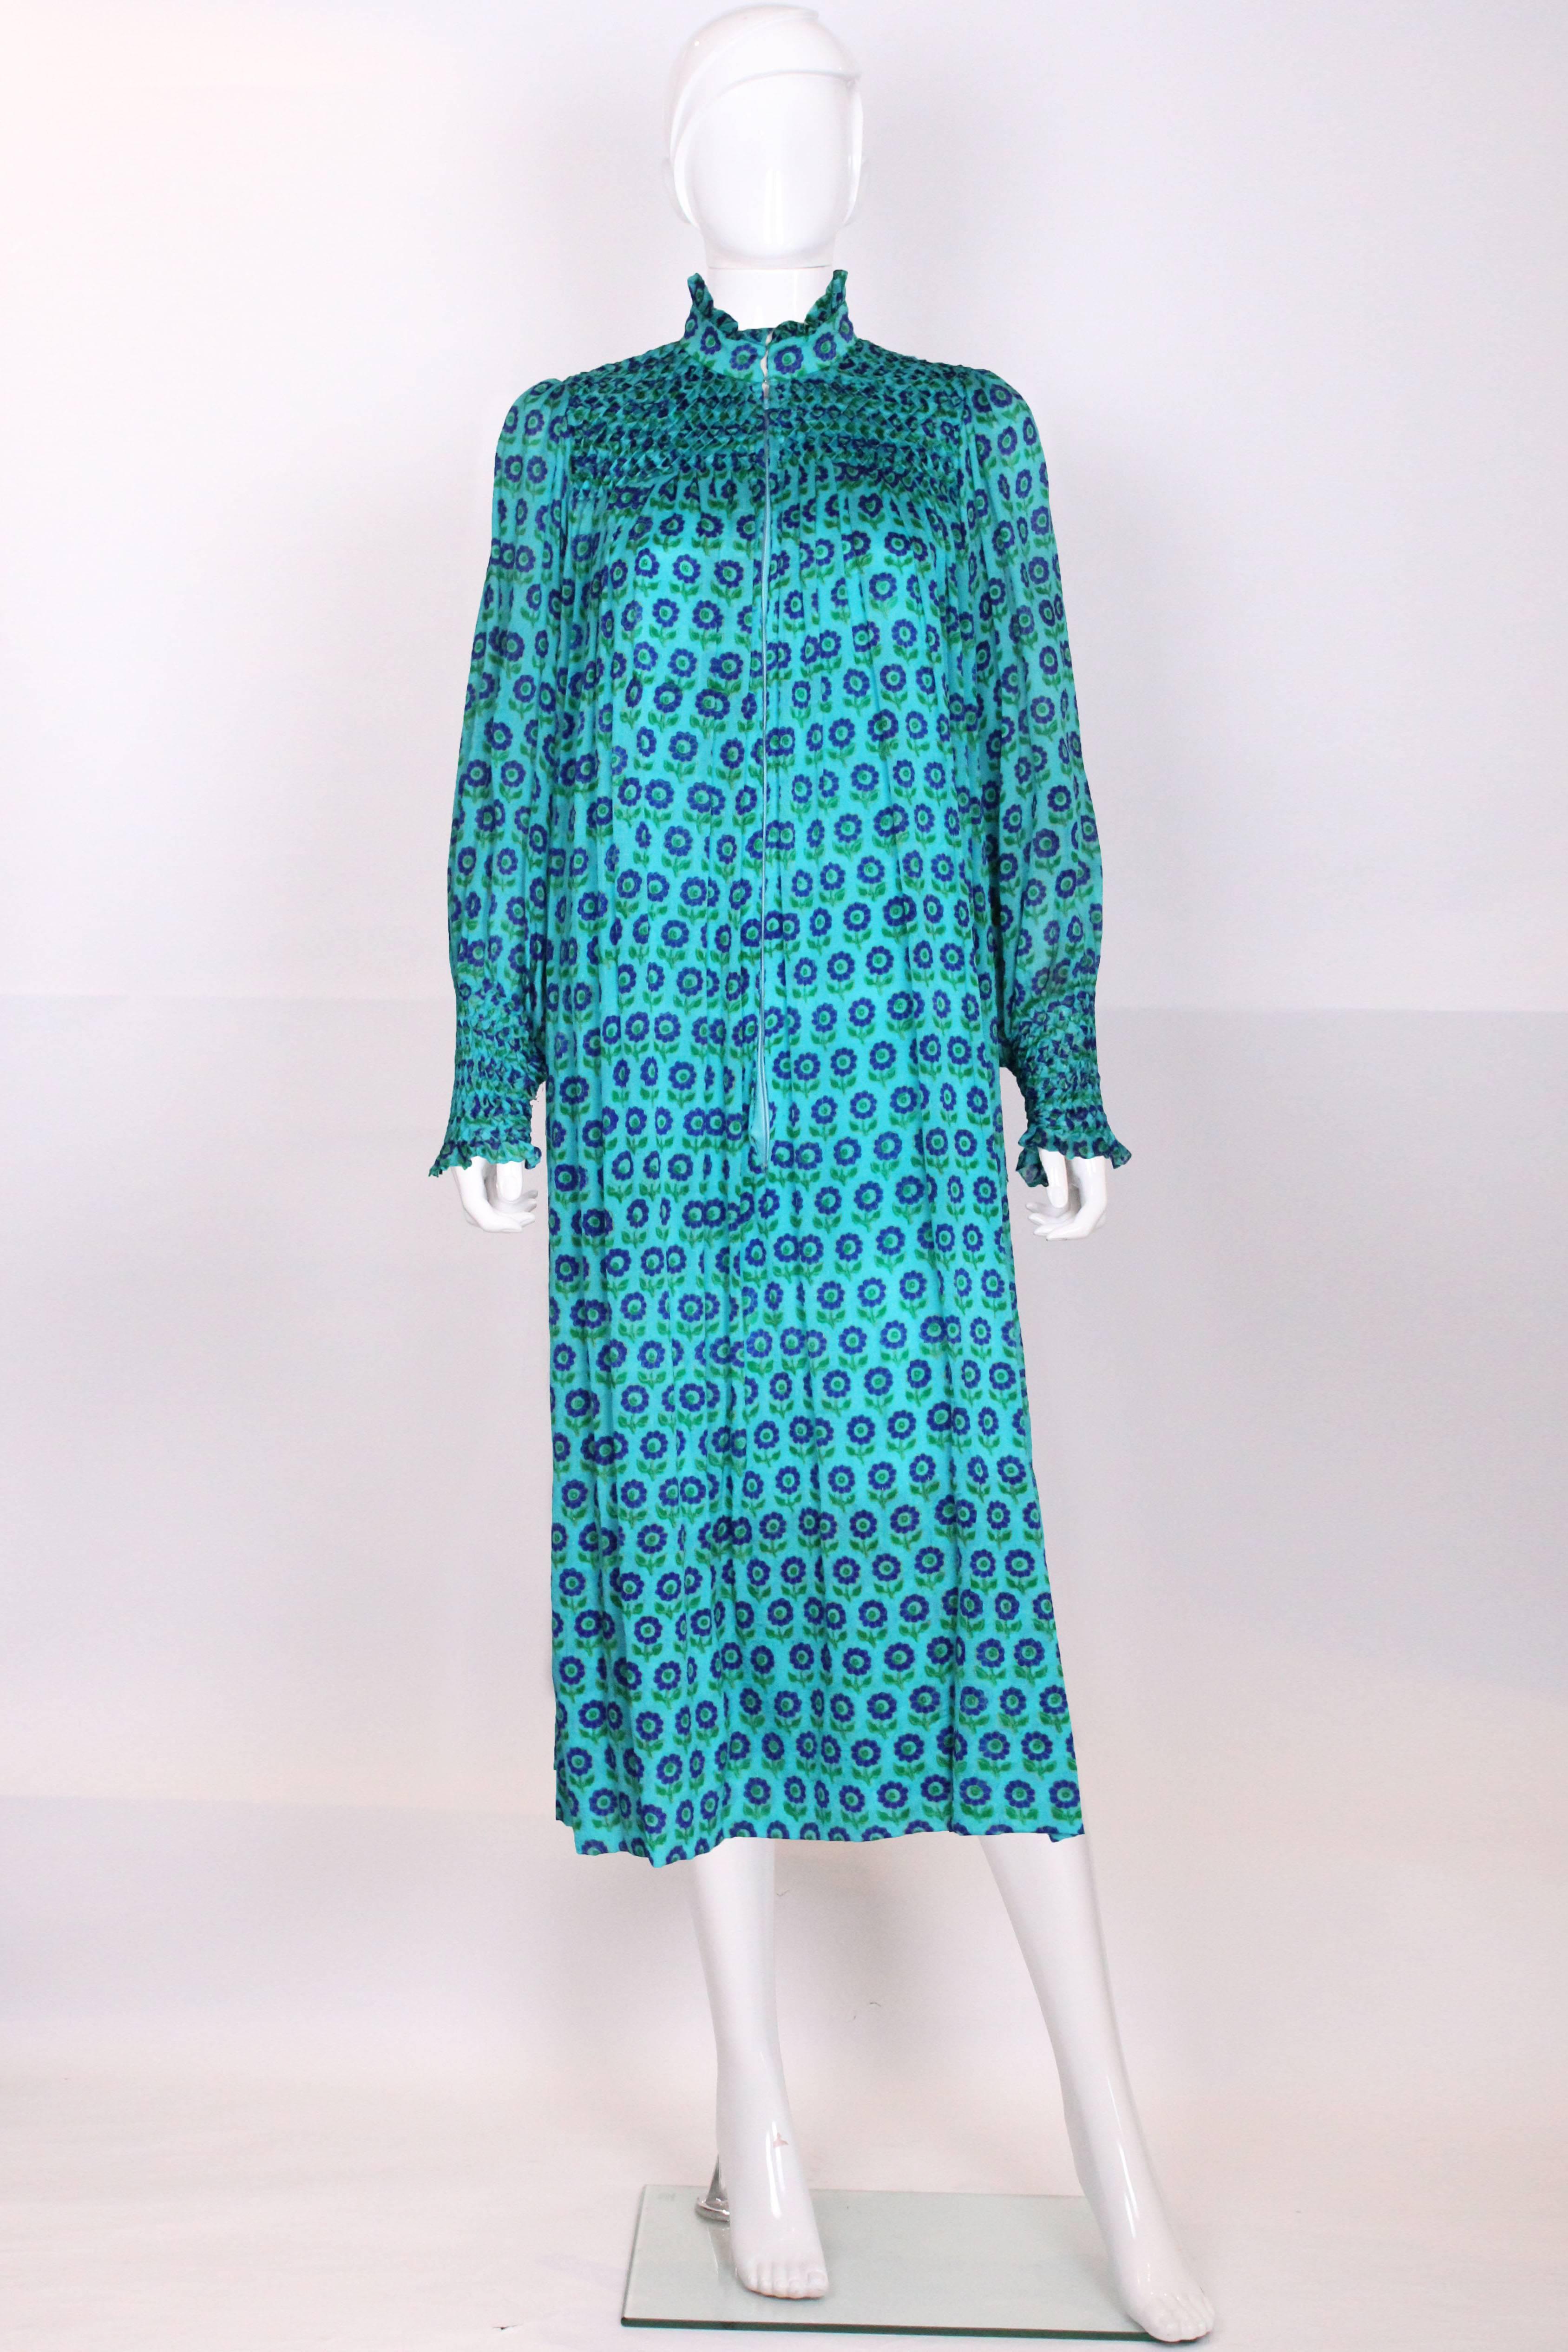 A charming silk dress from the 1970s made for Harrods. The fabric is a beautiful turquoise silk, with a floral design of purple petal flowers. The dress has a stand up pie crust collar,and there is wonderful smoking on the yoke and cuffs. The dress